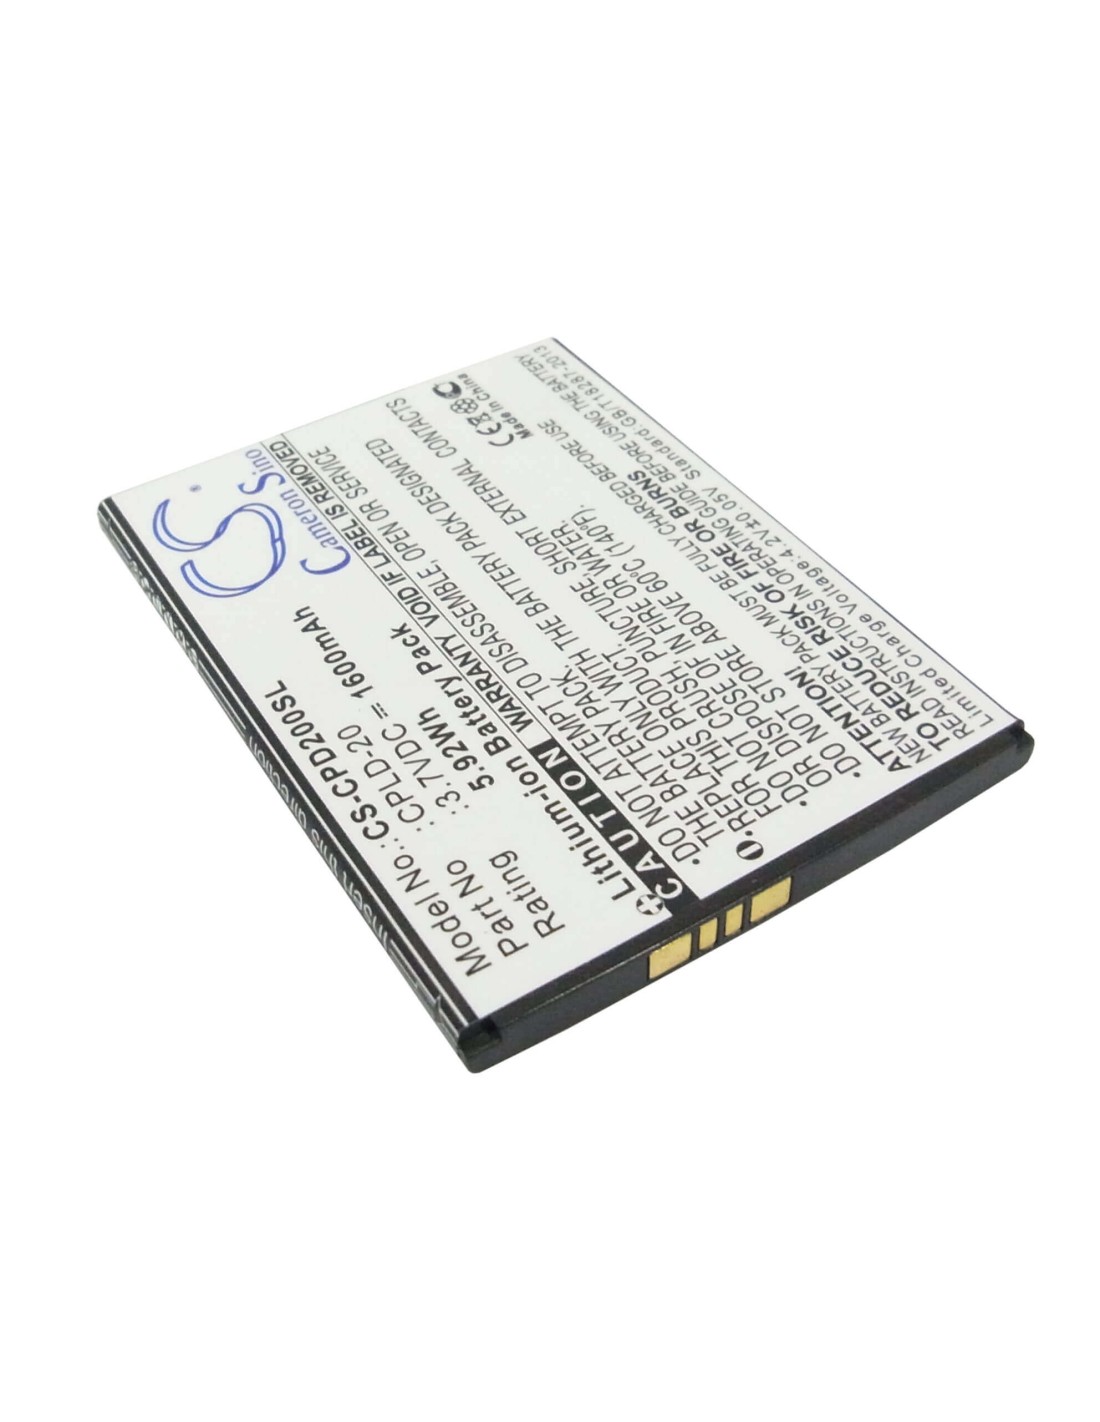 Battery for Coolpad 8730, 8736, 8920 3.7V, 1600mAh - 5.92Wh